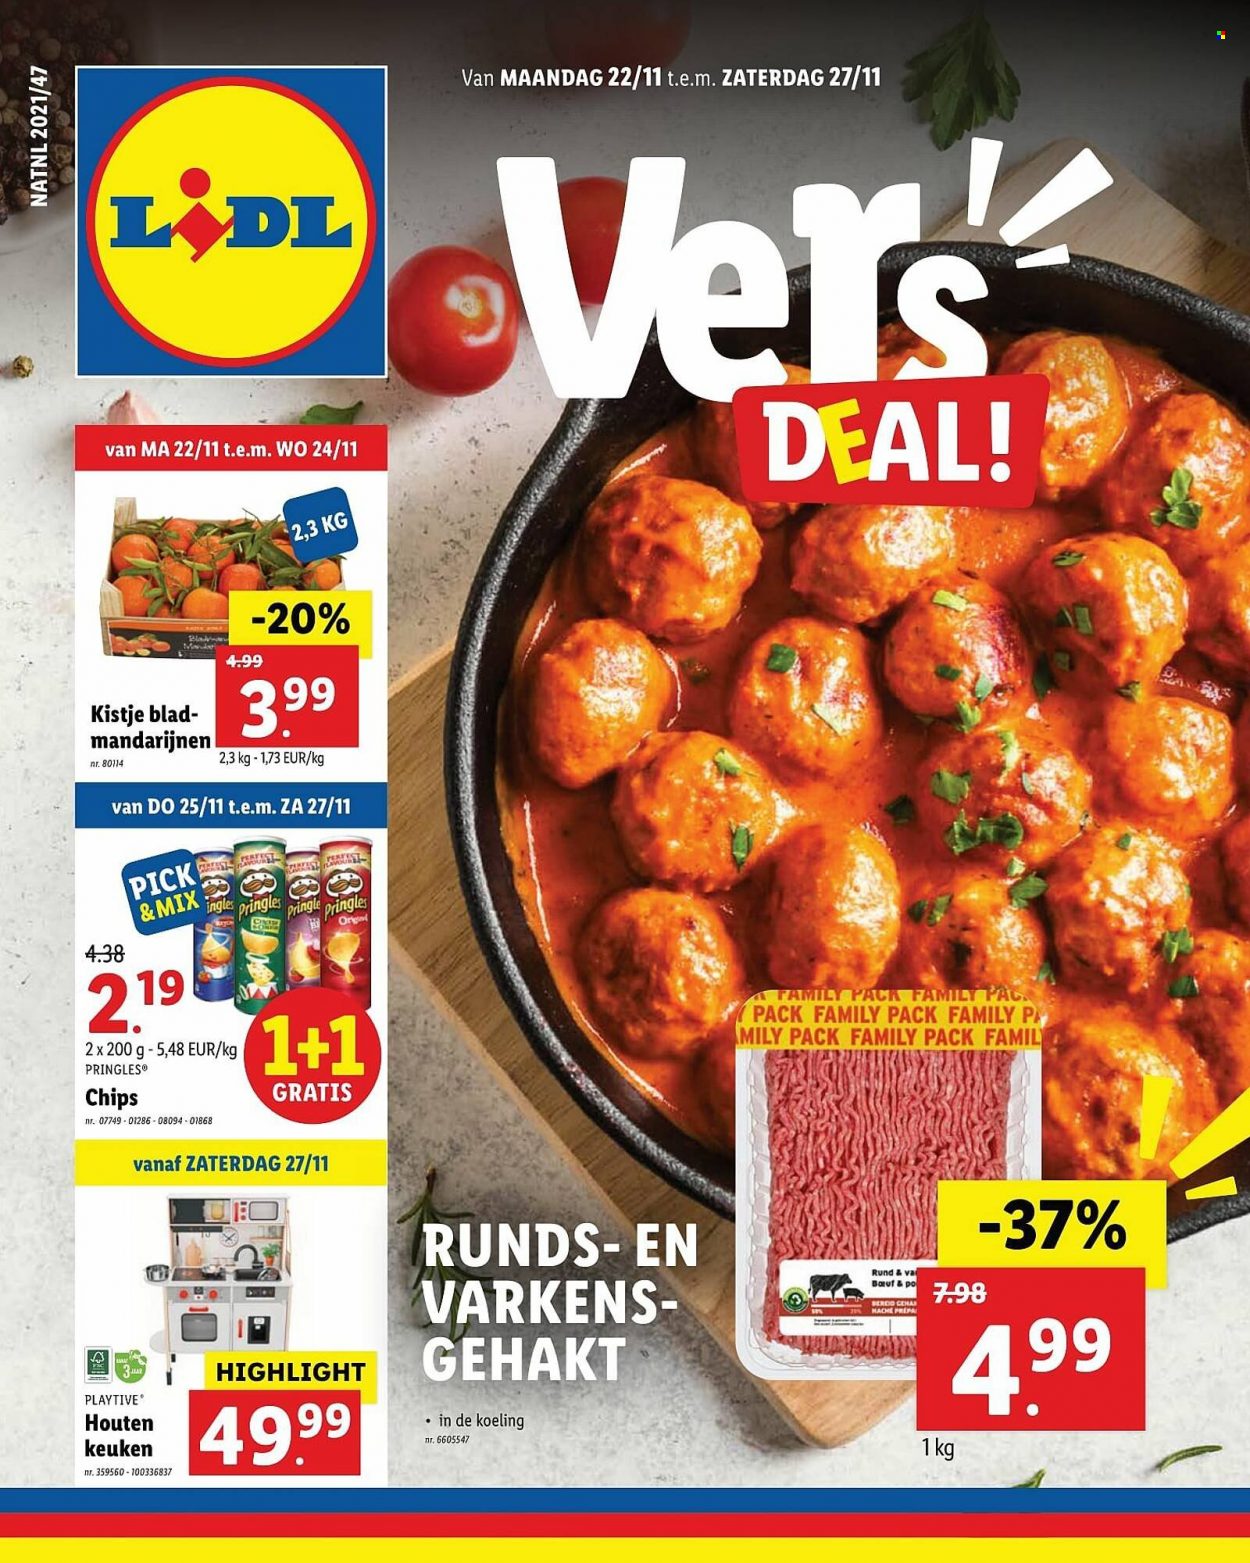 Catalogue Lidl - 22.11.2021 - 27.11.2021. Page 1.